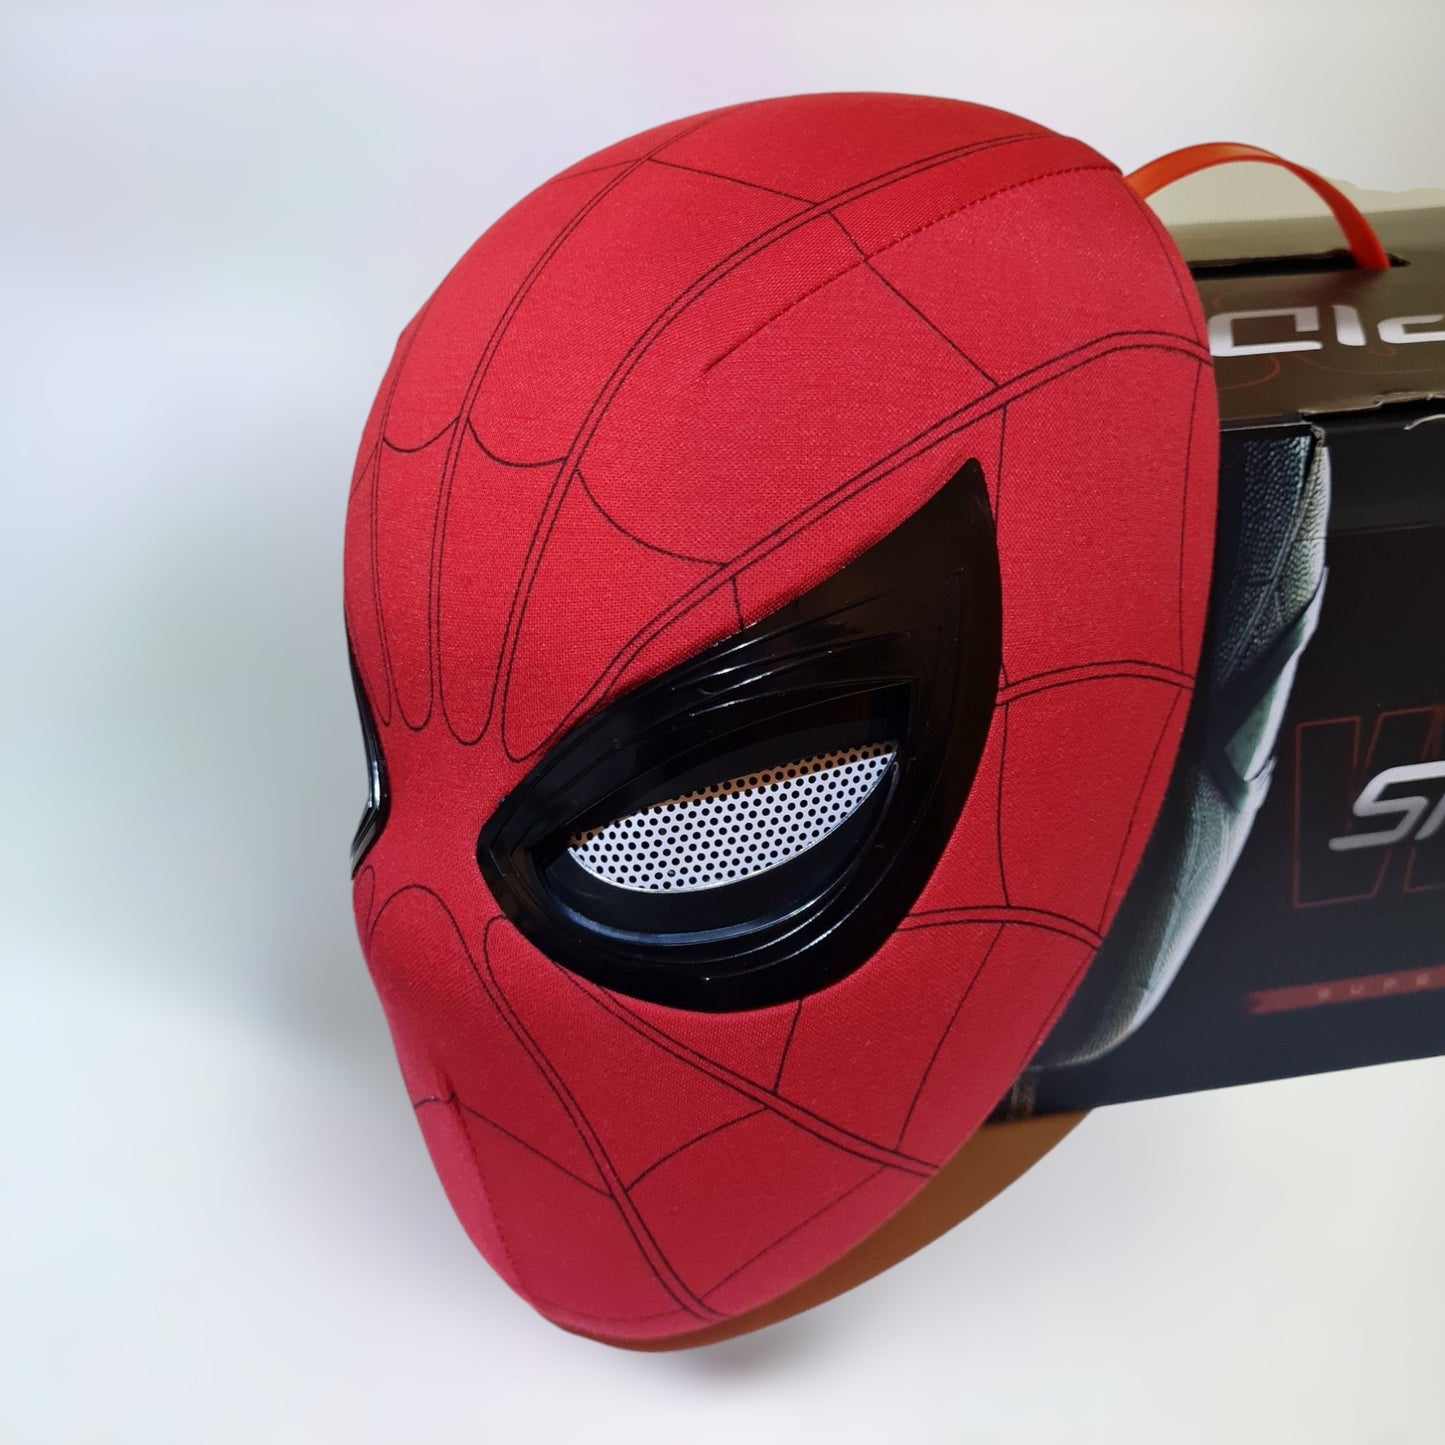 Spiderman mask with blinking movable eyes realistic ring remote control and box on a plain white background.